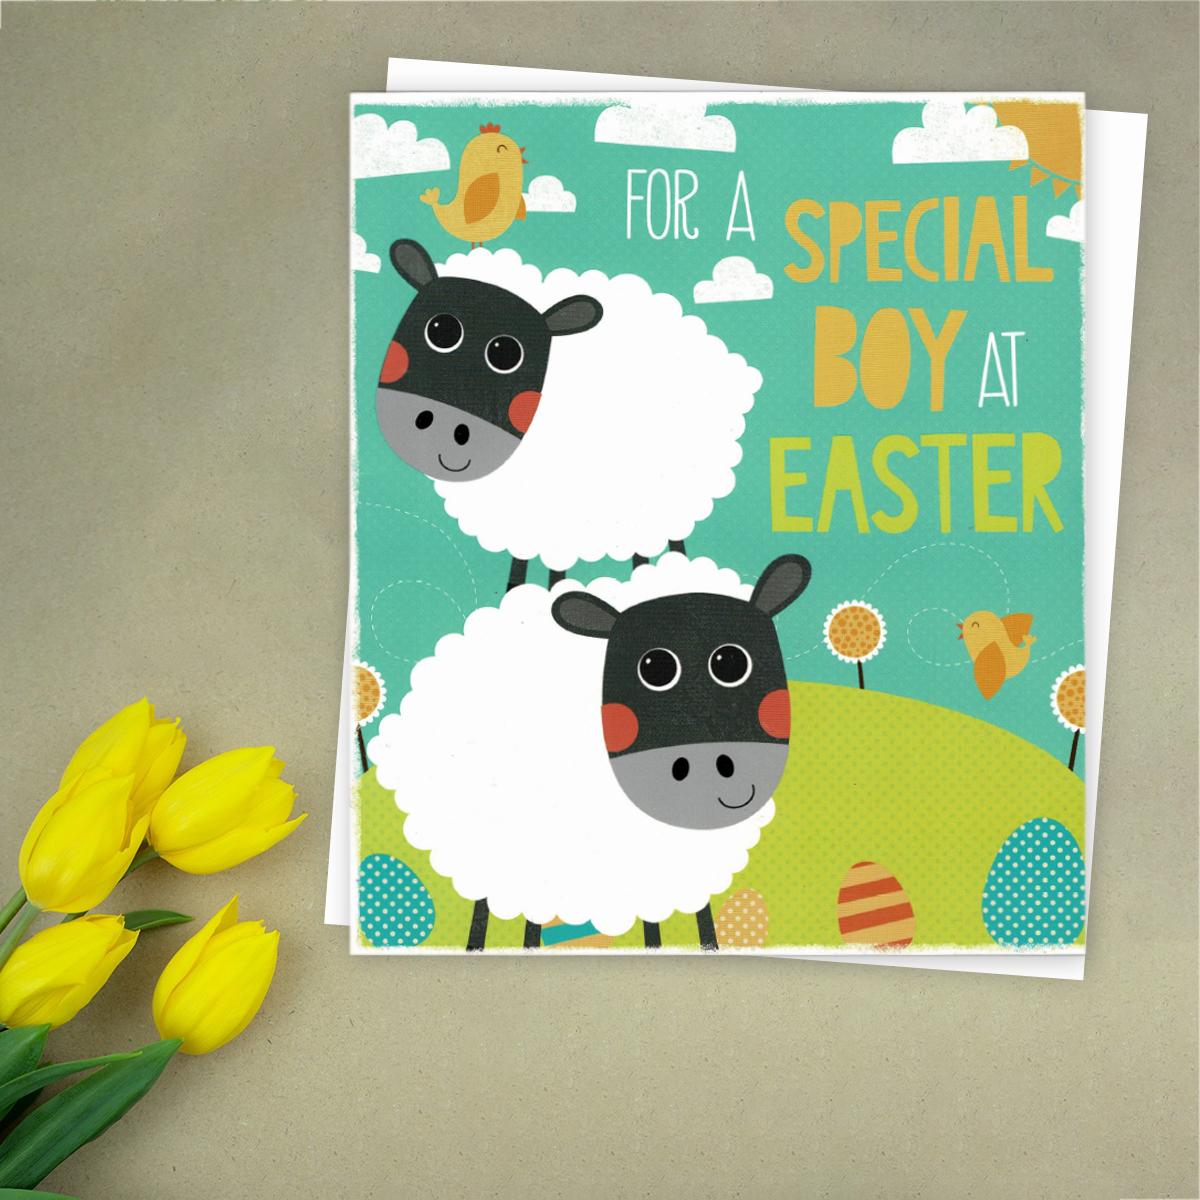 ' For A Special Boy At Easter' Glossy Card Featuring Two Cute Sheep! Complete With White Envelope